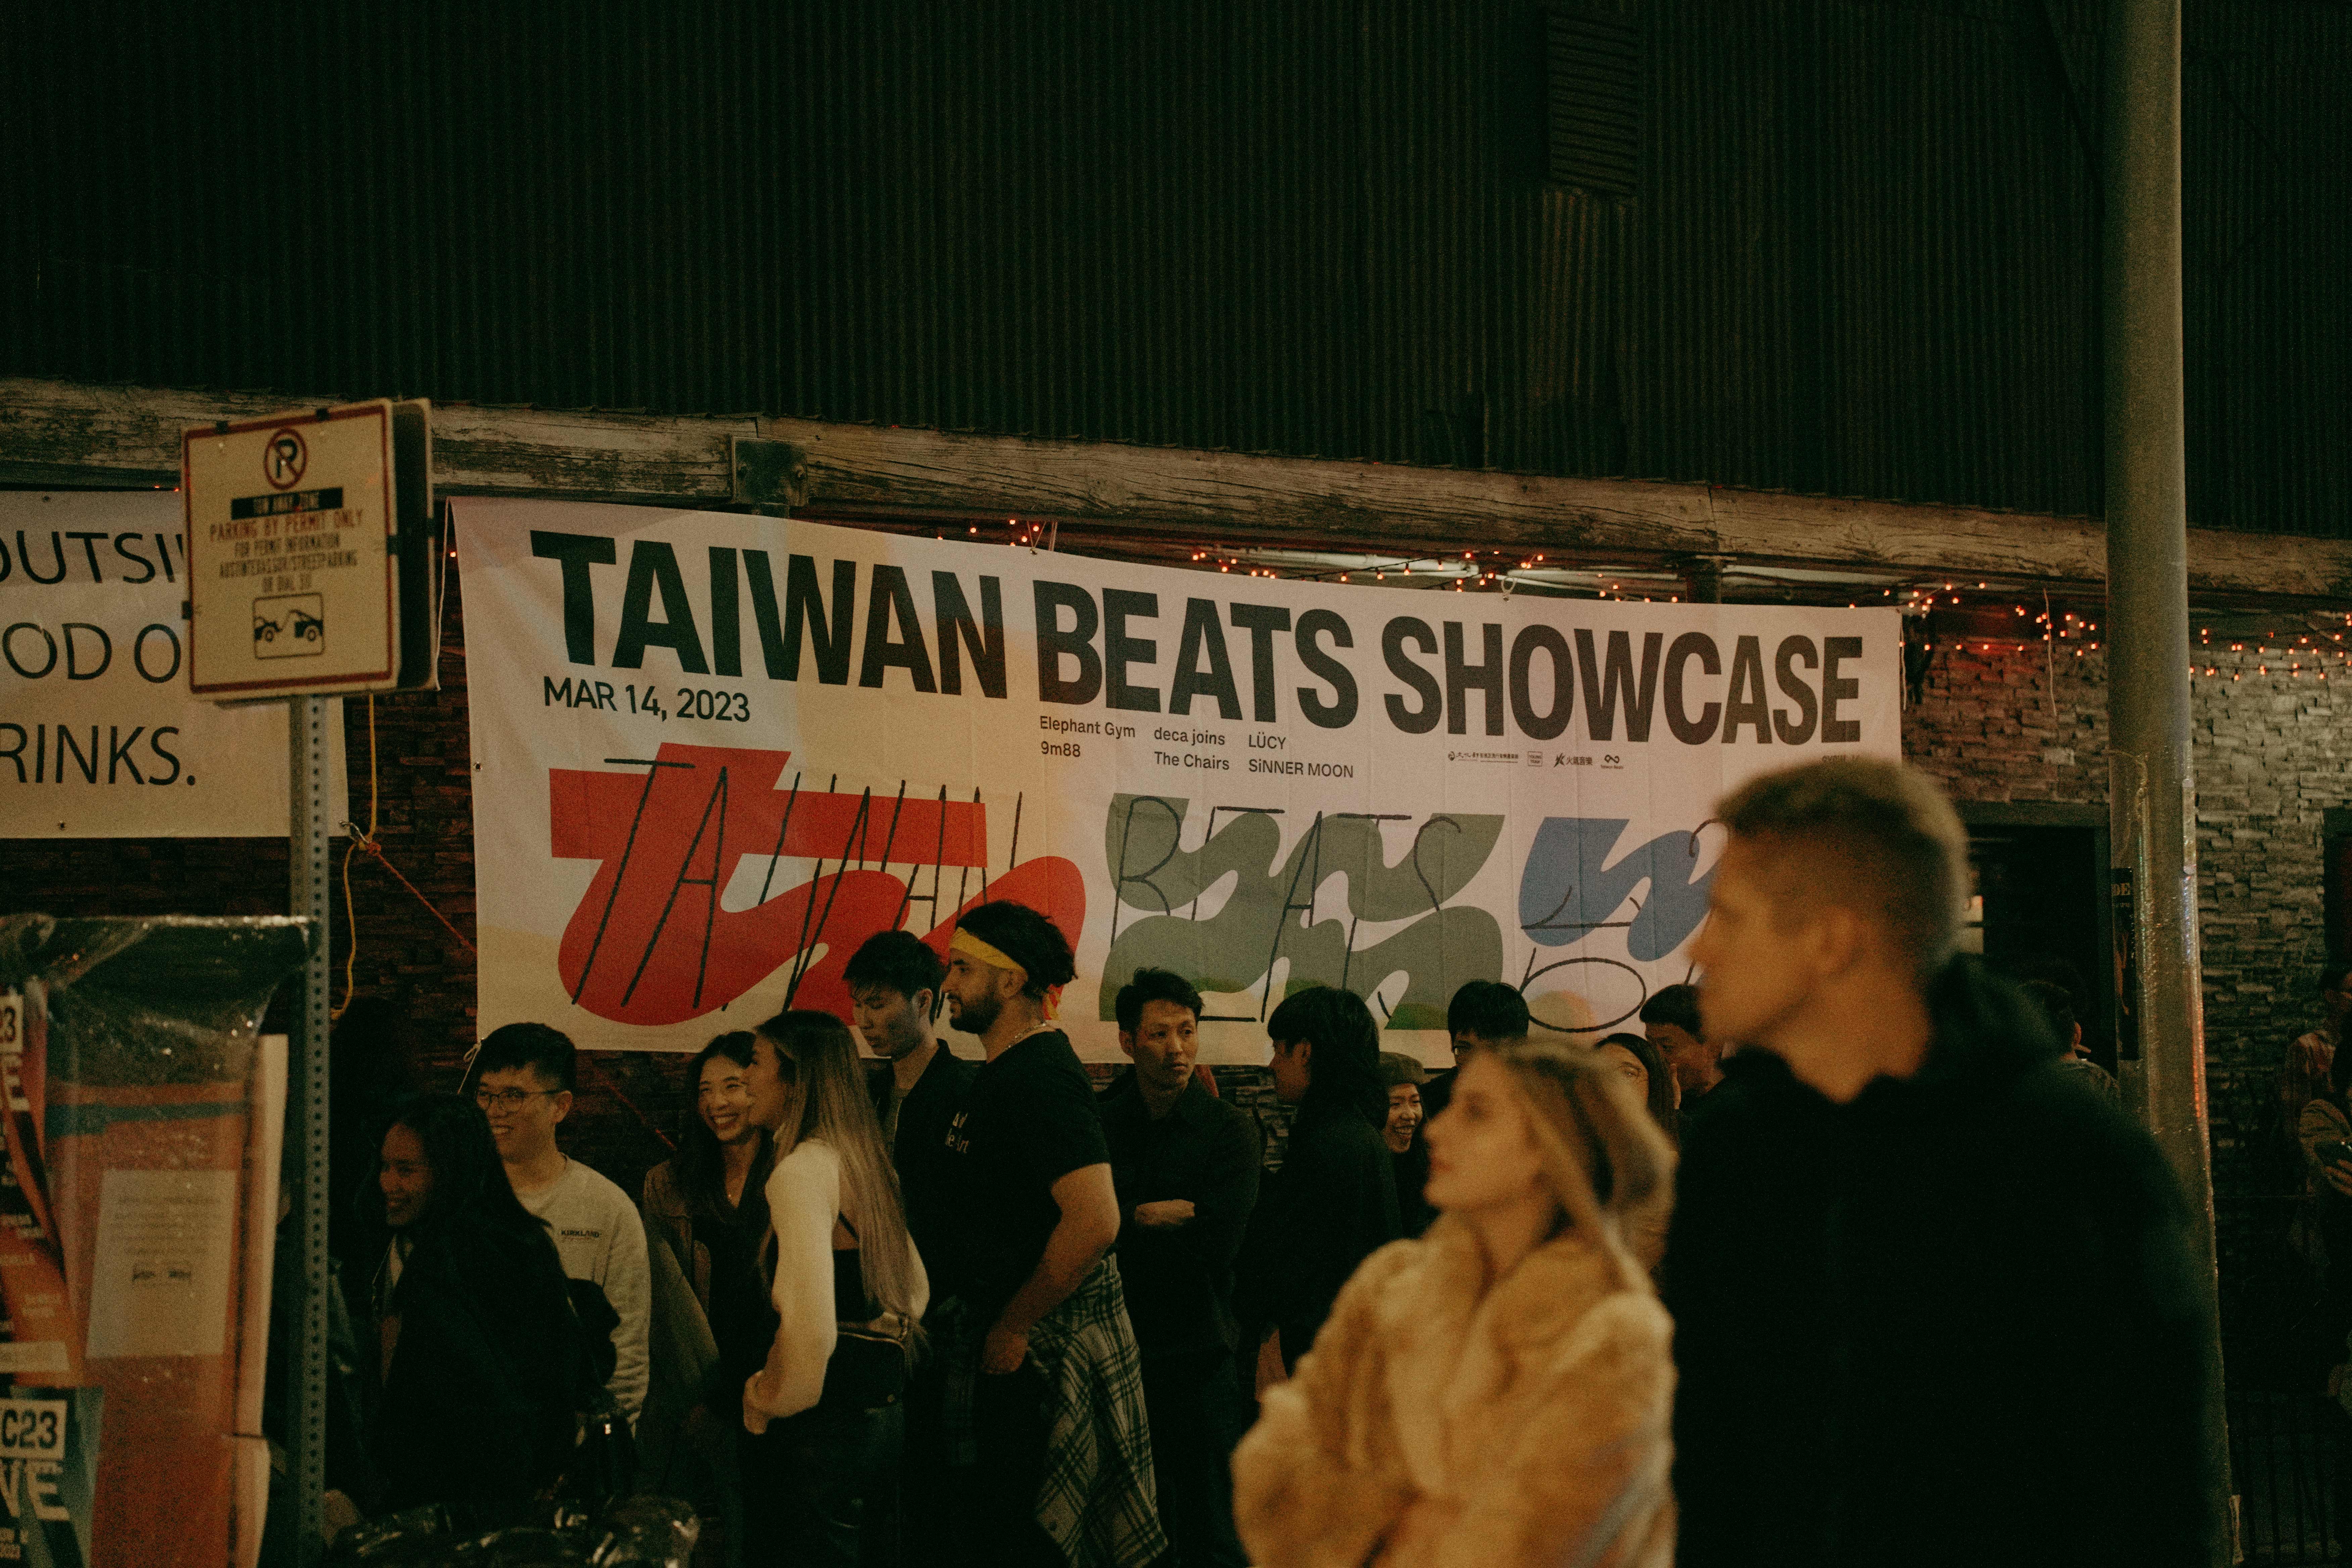 Taiwan Beats Showcase Shatters Records with Unbeatable Lineup at SXSW 2023